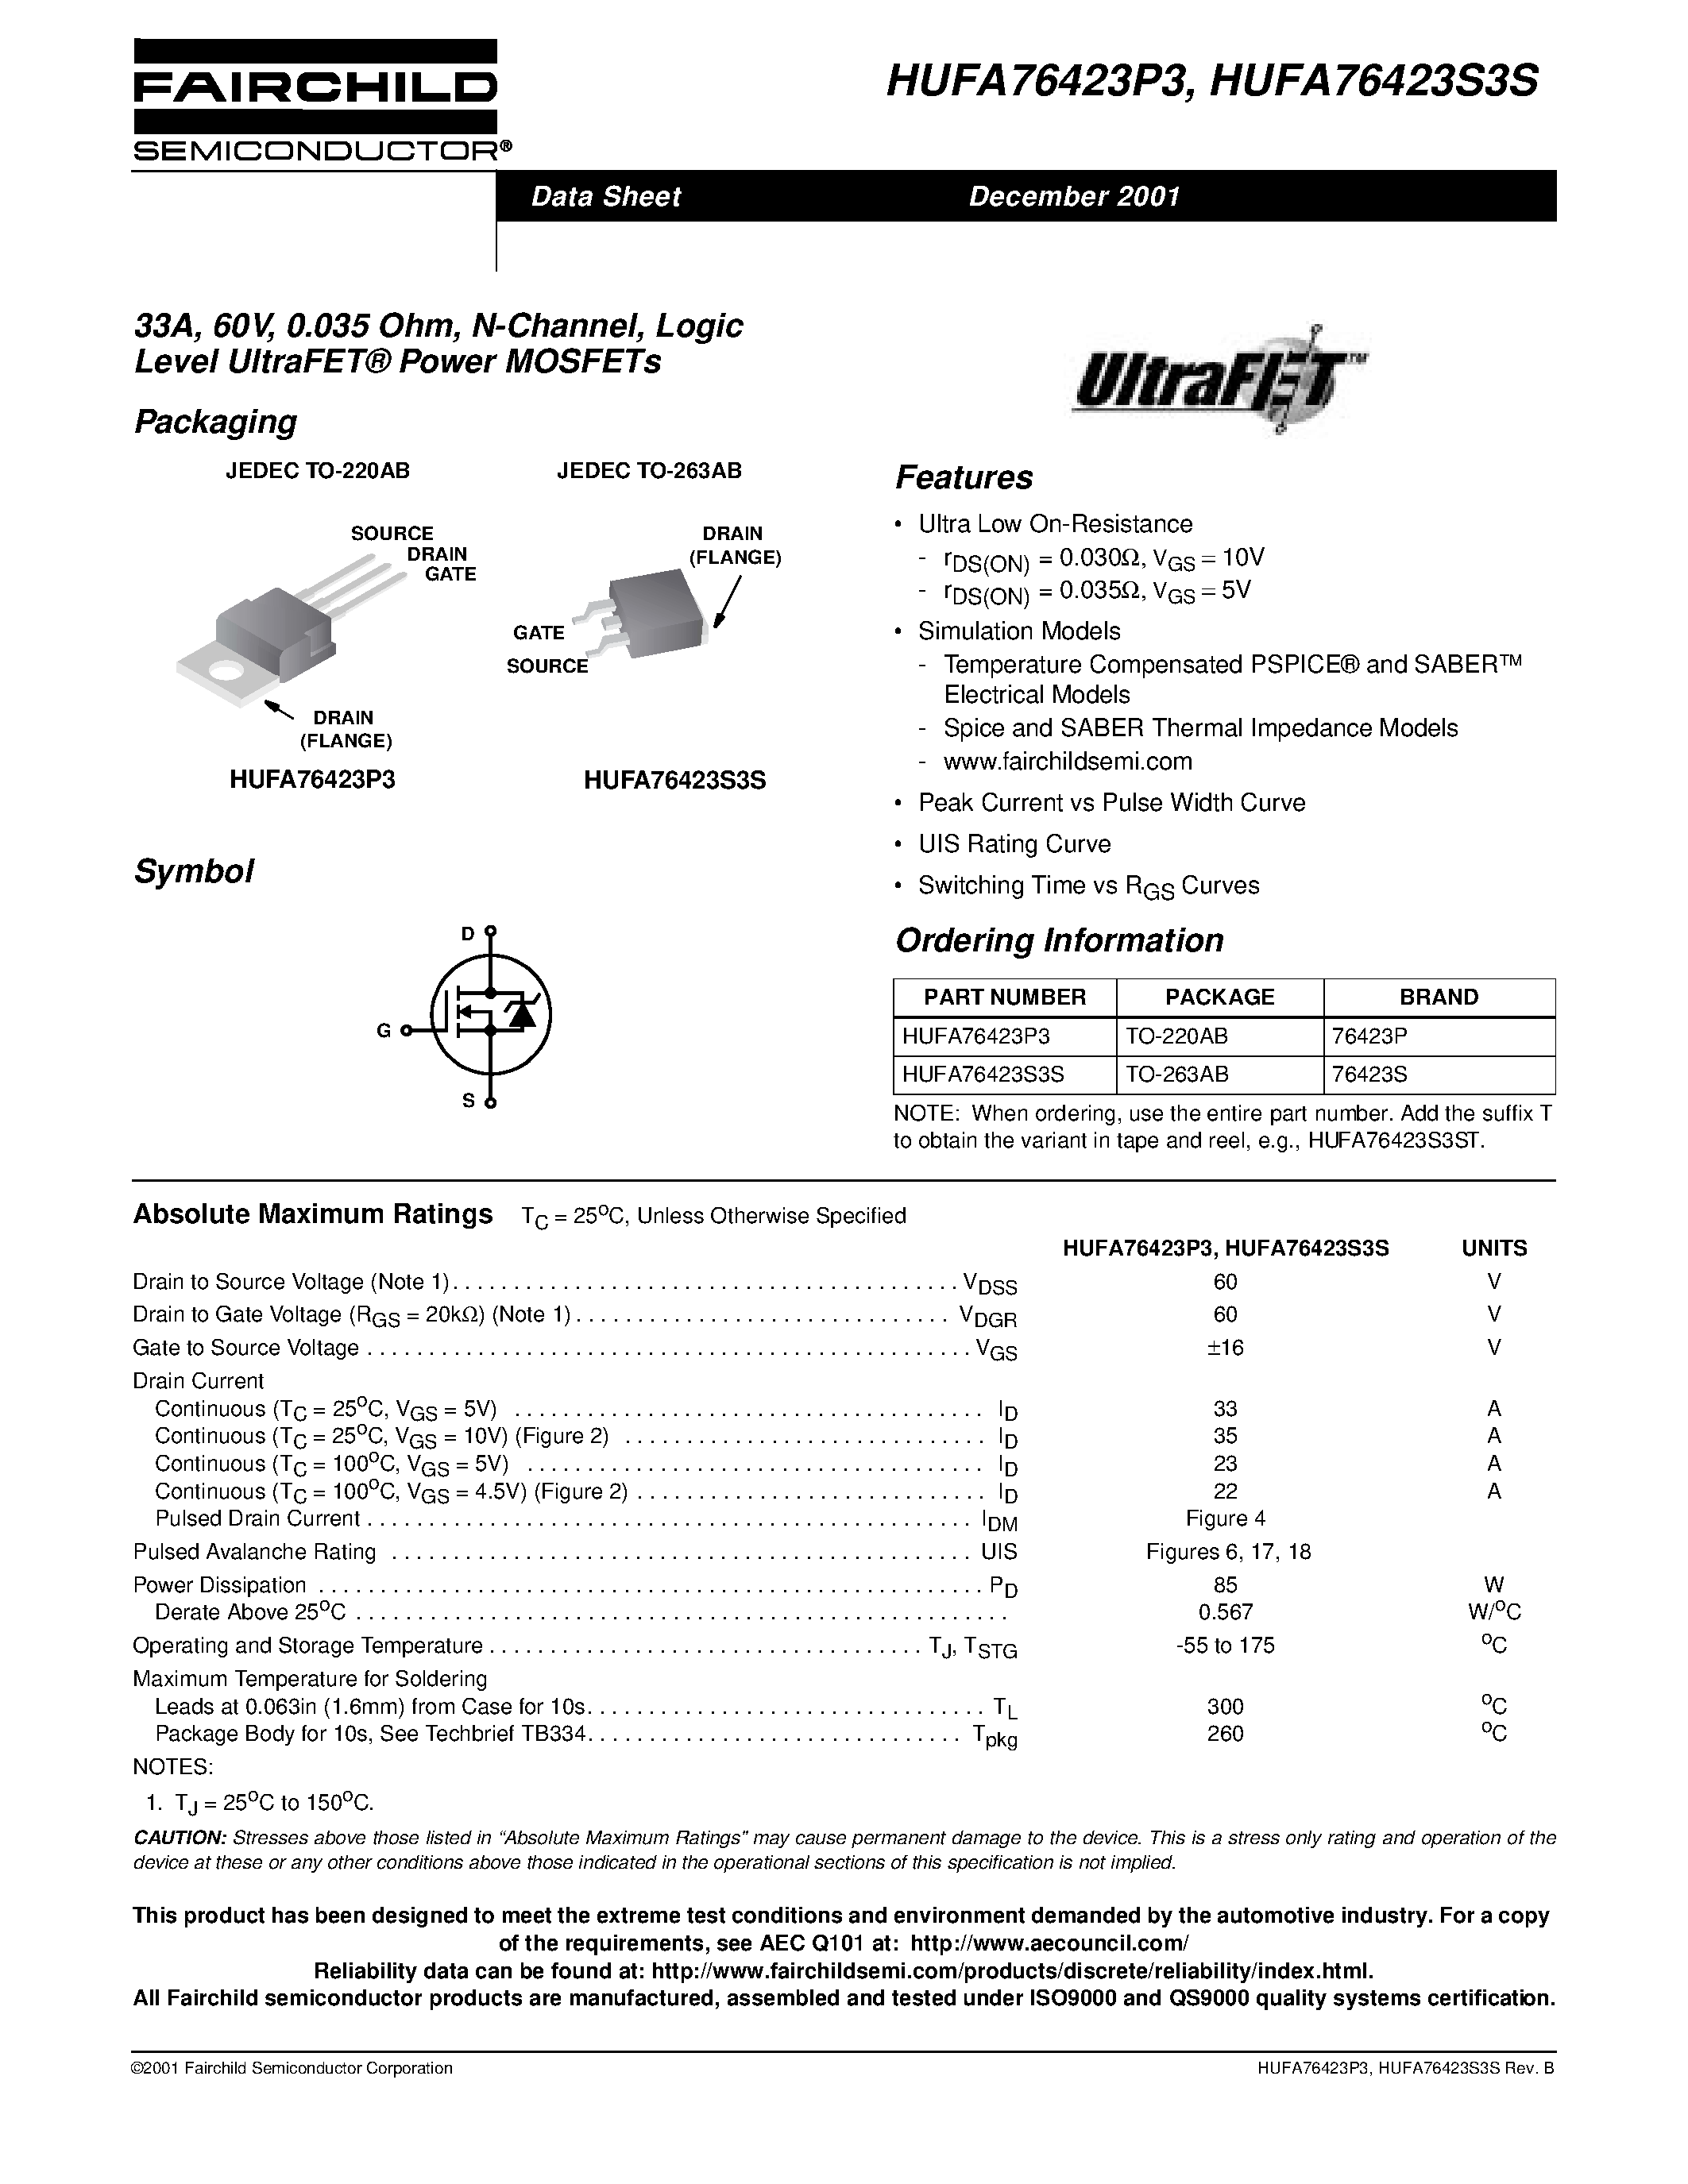 Datasheet HUFA76423P3 - 33A/ 60V/ 0.035 Ohm/ N-Channel/ Logic Level UltraFET Power MOSFETs page 1